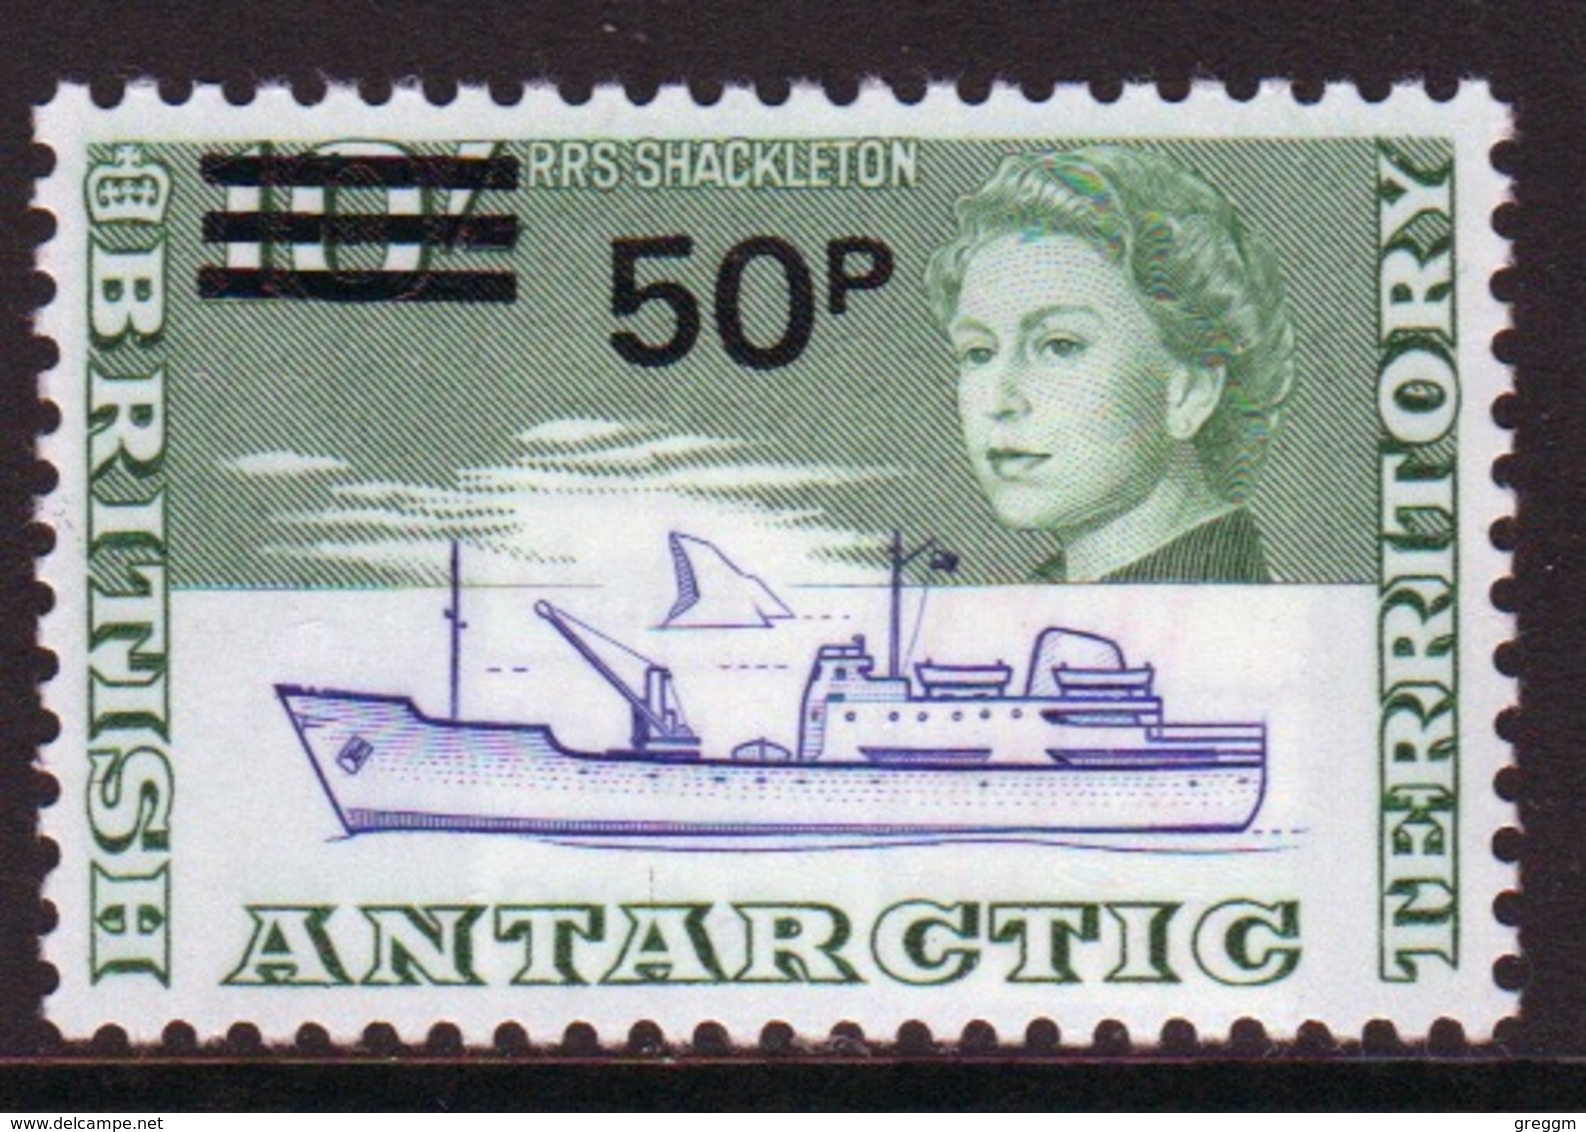 British Antarctic Territory 1971 Definitive Stamp 10/- Overprinted 50p In Decimal Currency In Mounted Mint Condition. - Unused Stamps